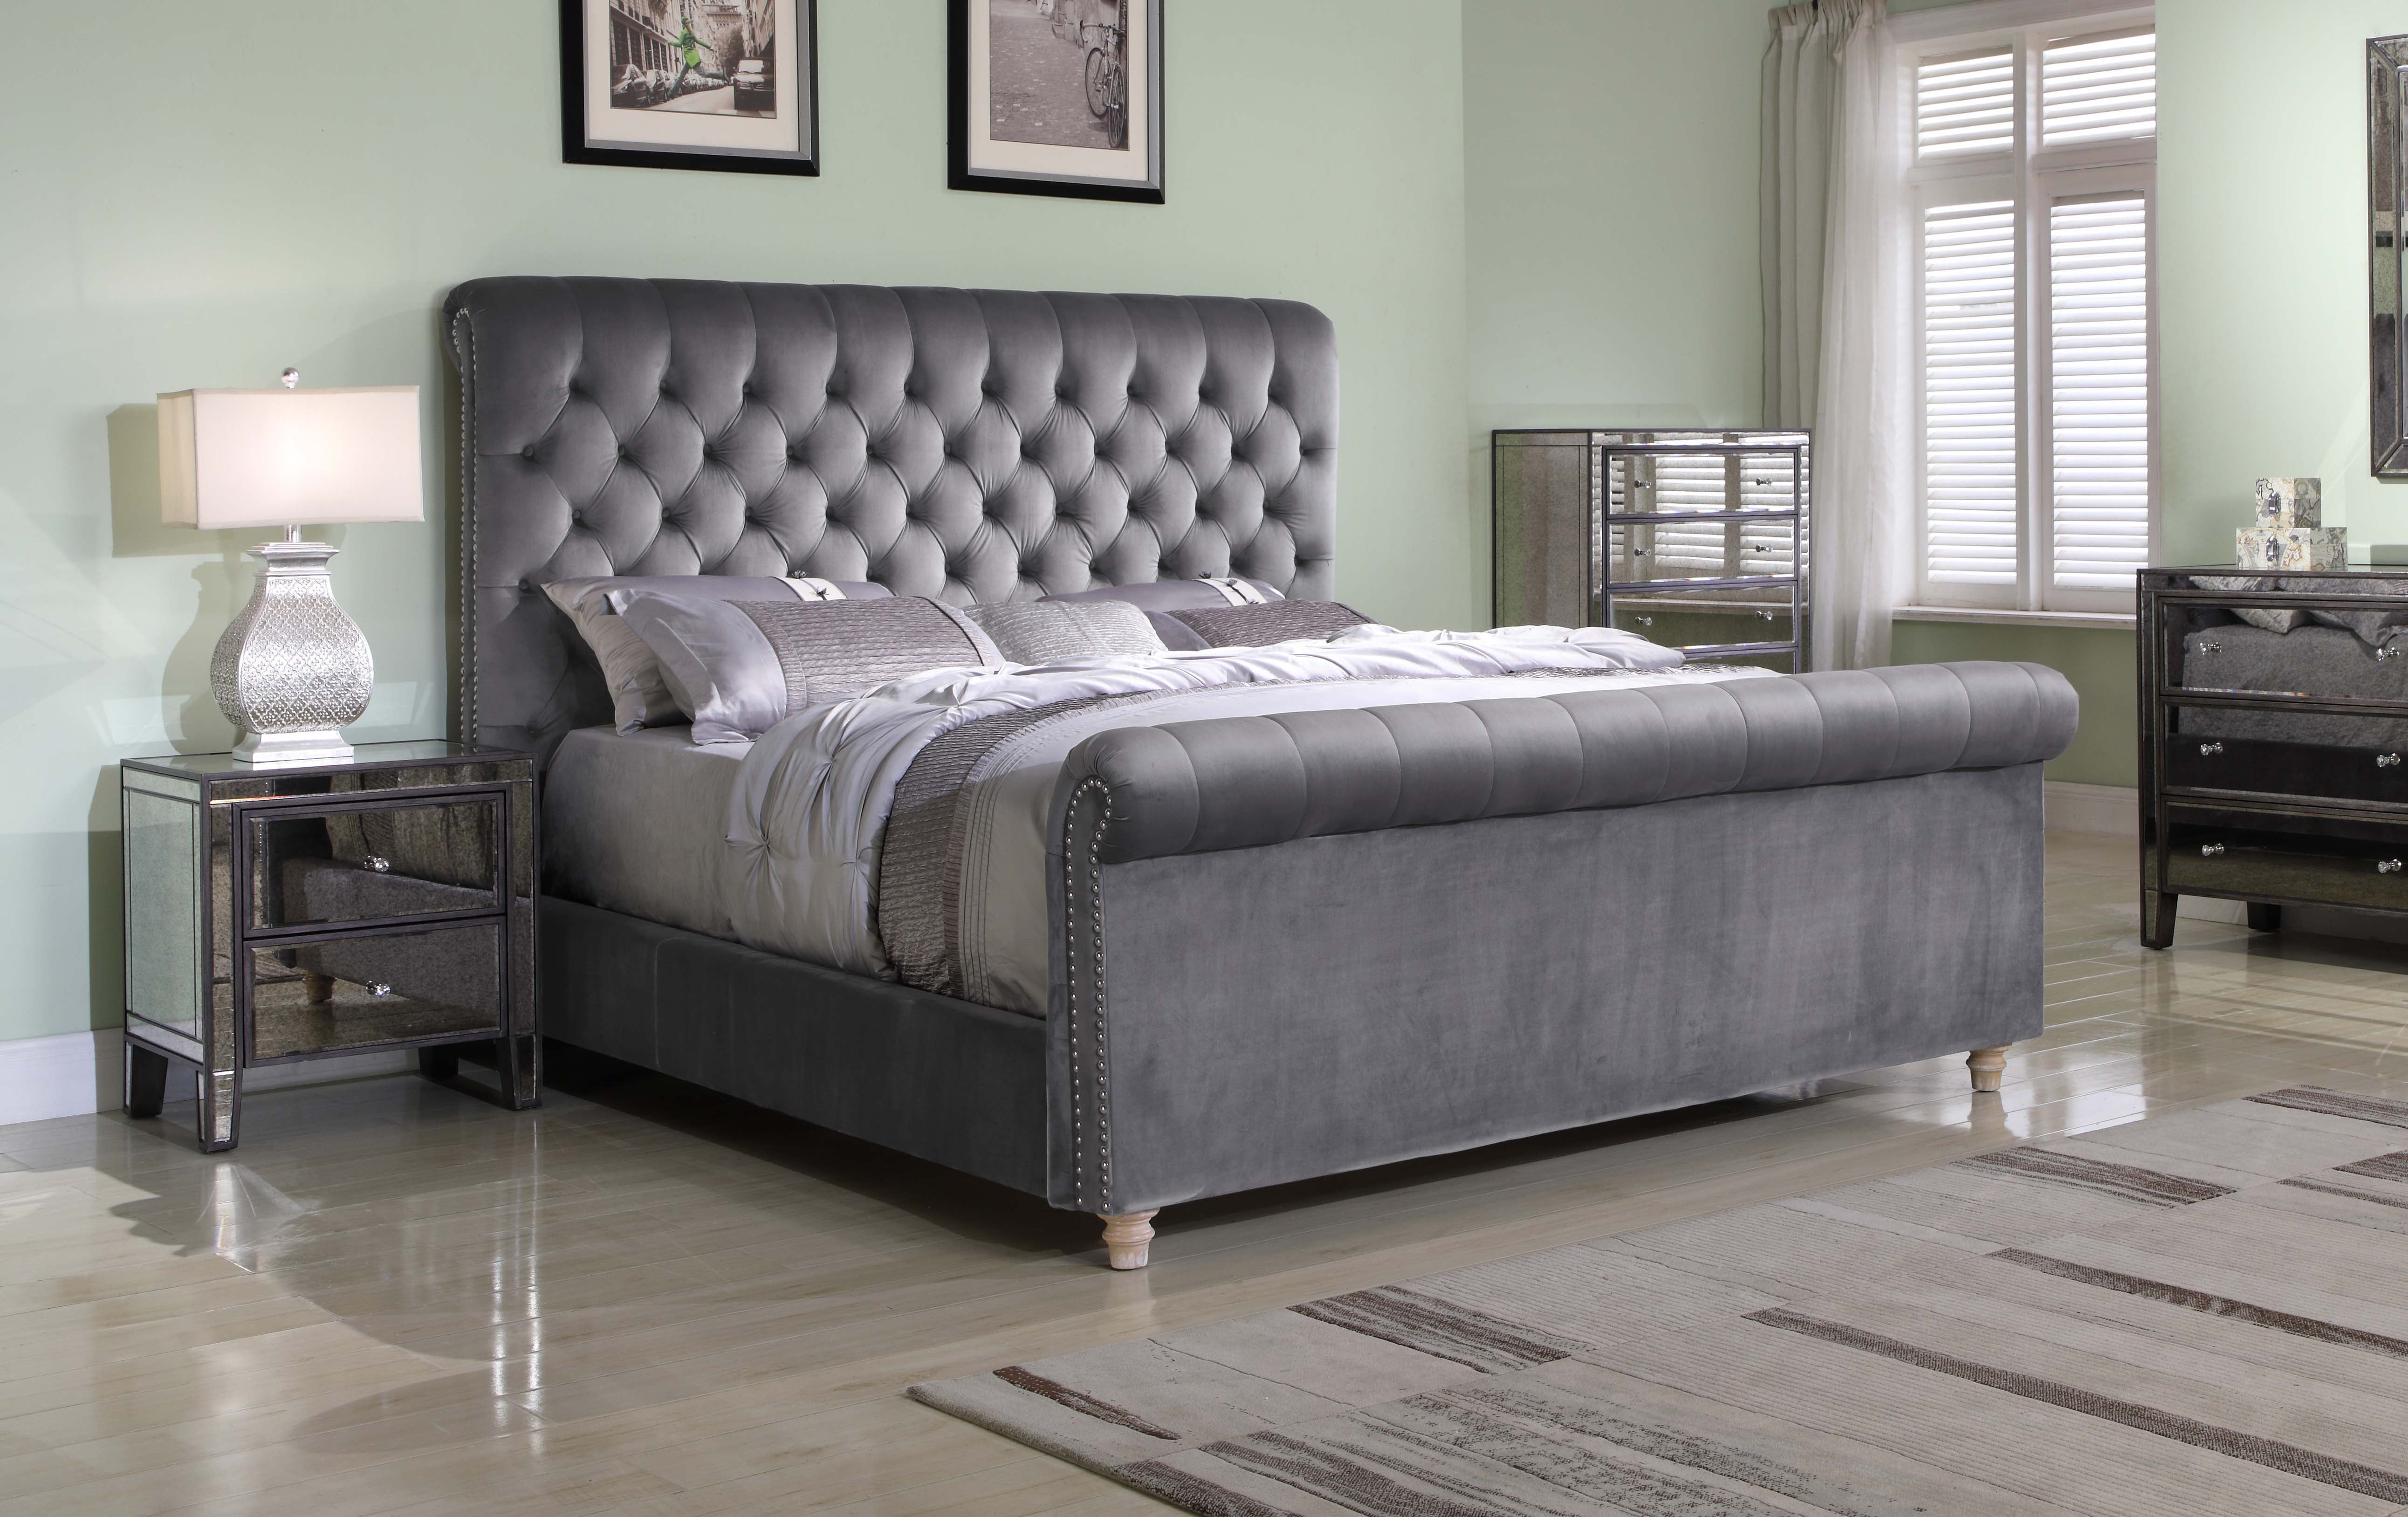 Best Master Furniture Jean Carrie, Grey Sleigh Bed King Size